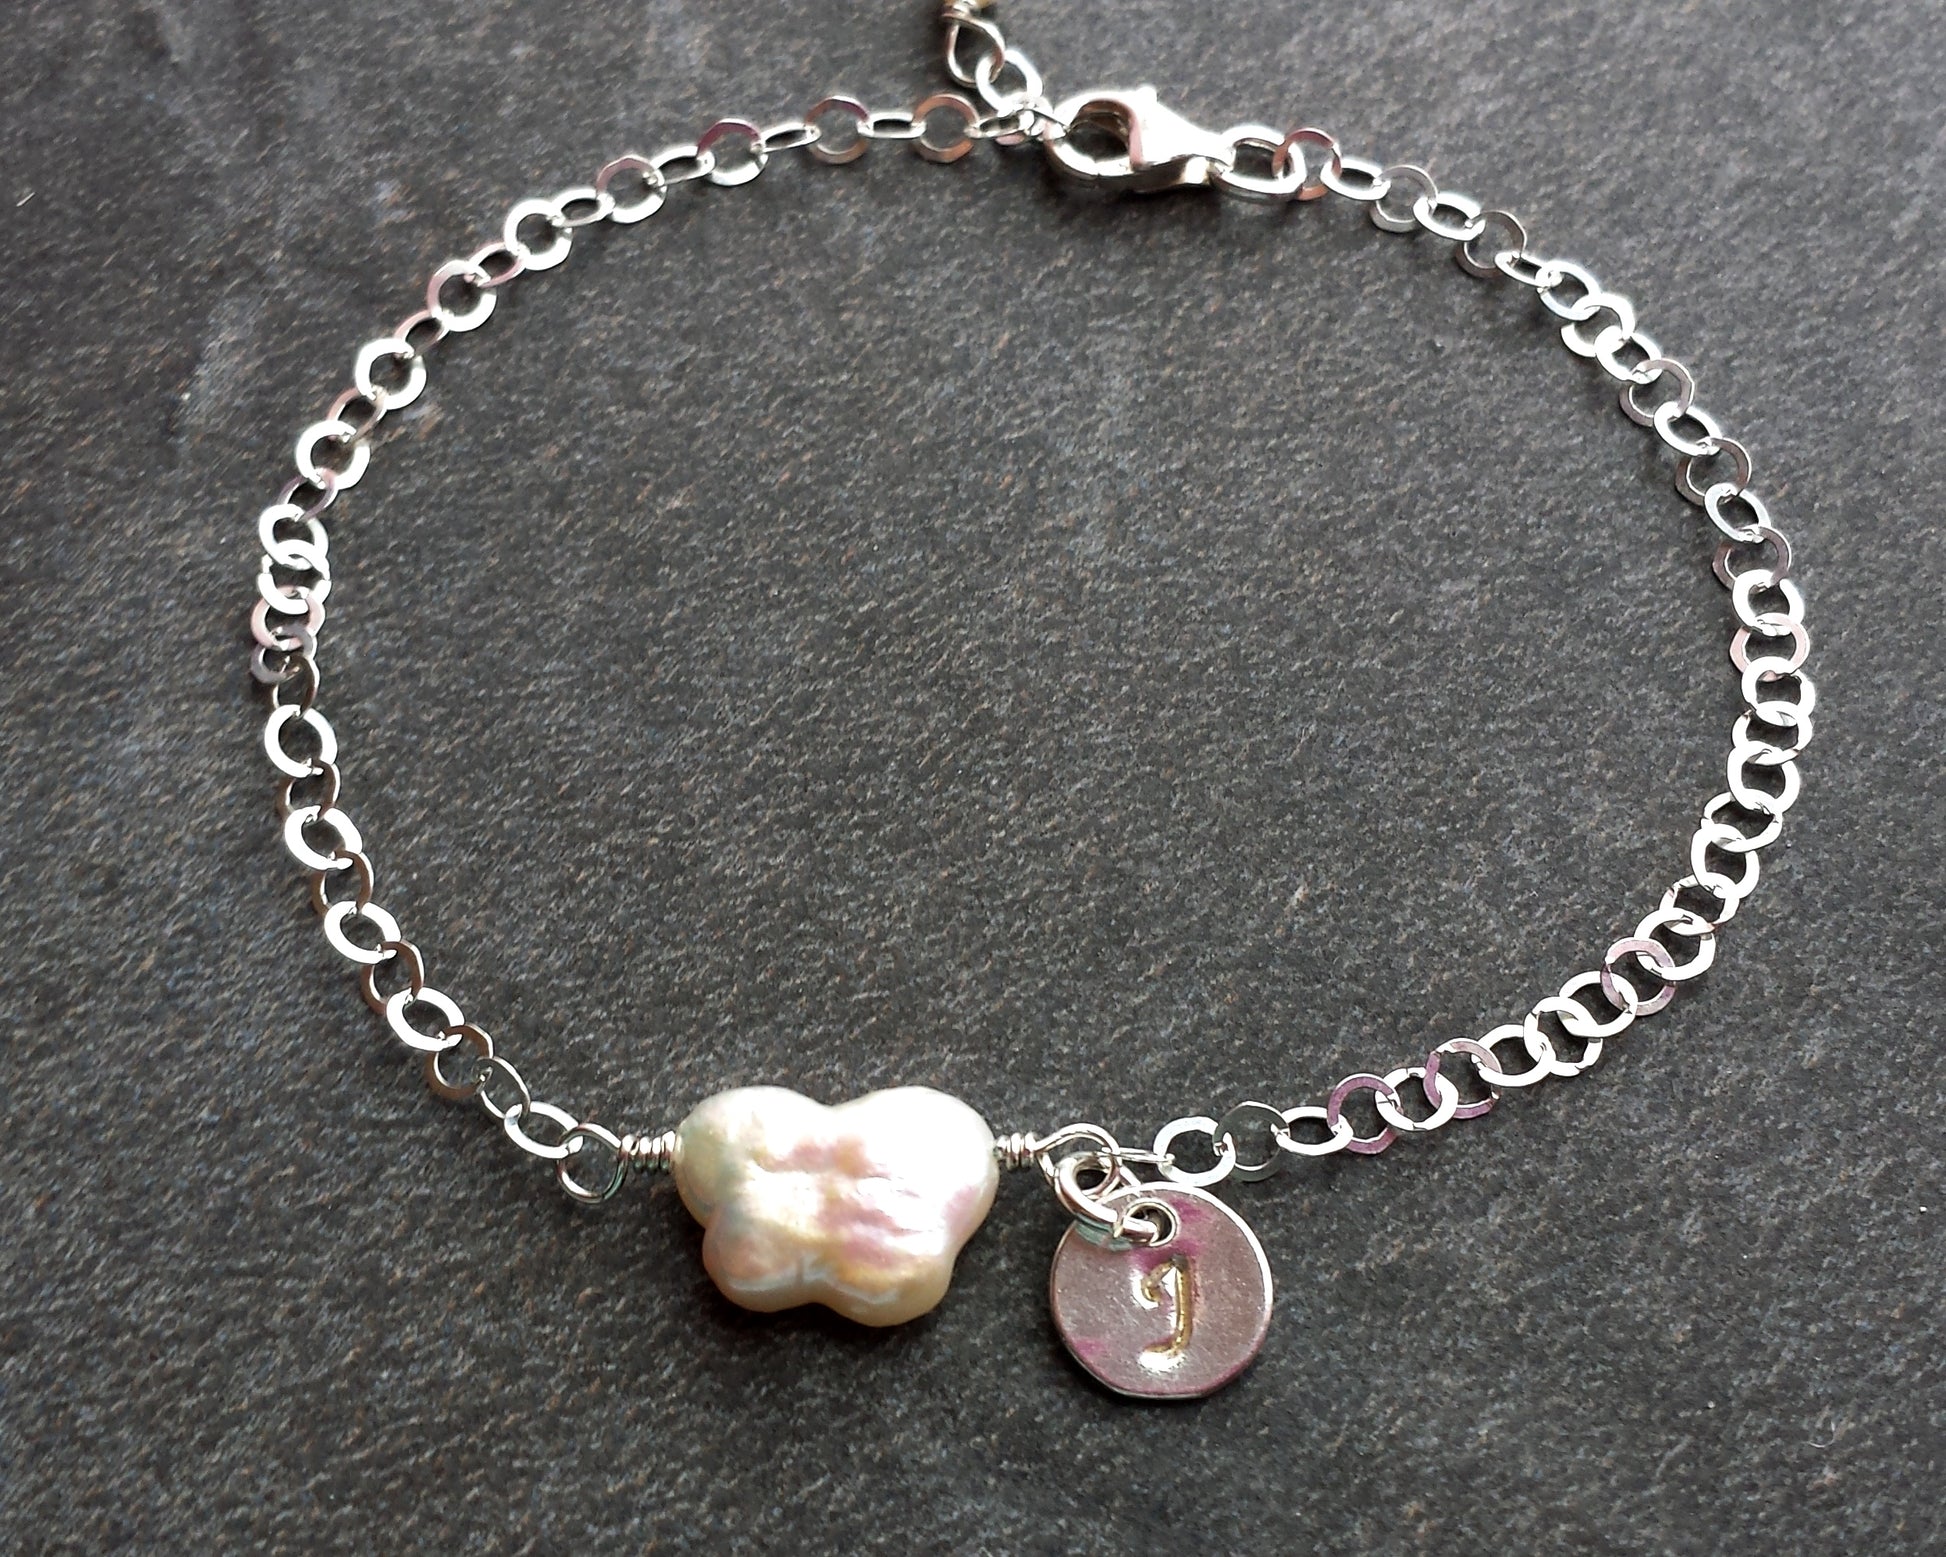 Handmade Butterfly Pearl Bracelet and Ankle Bracelet / Anklet made with 925 Sterling Silver and a Freshwater Cultured Pearl Butterfly, Hand Stamped Initial, Lobster Claw Clasp, Adjustable.